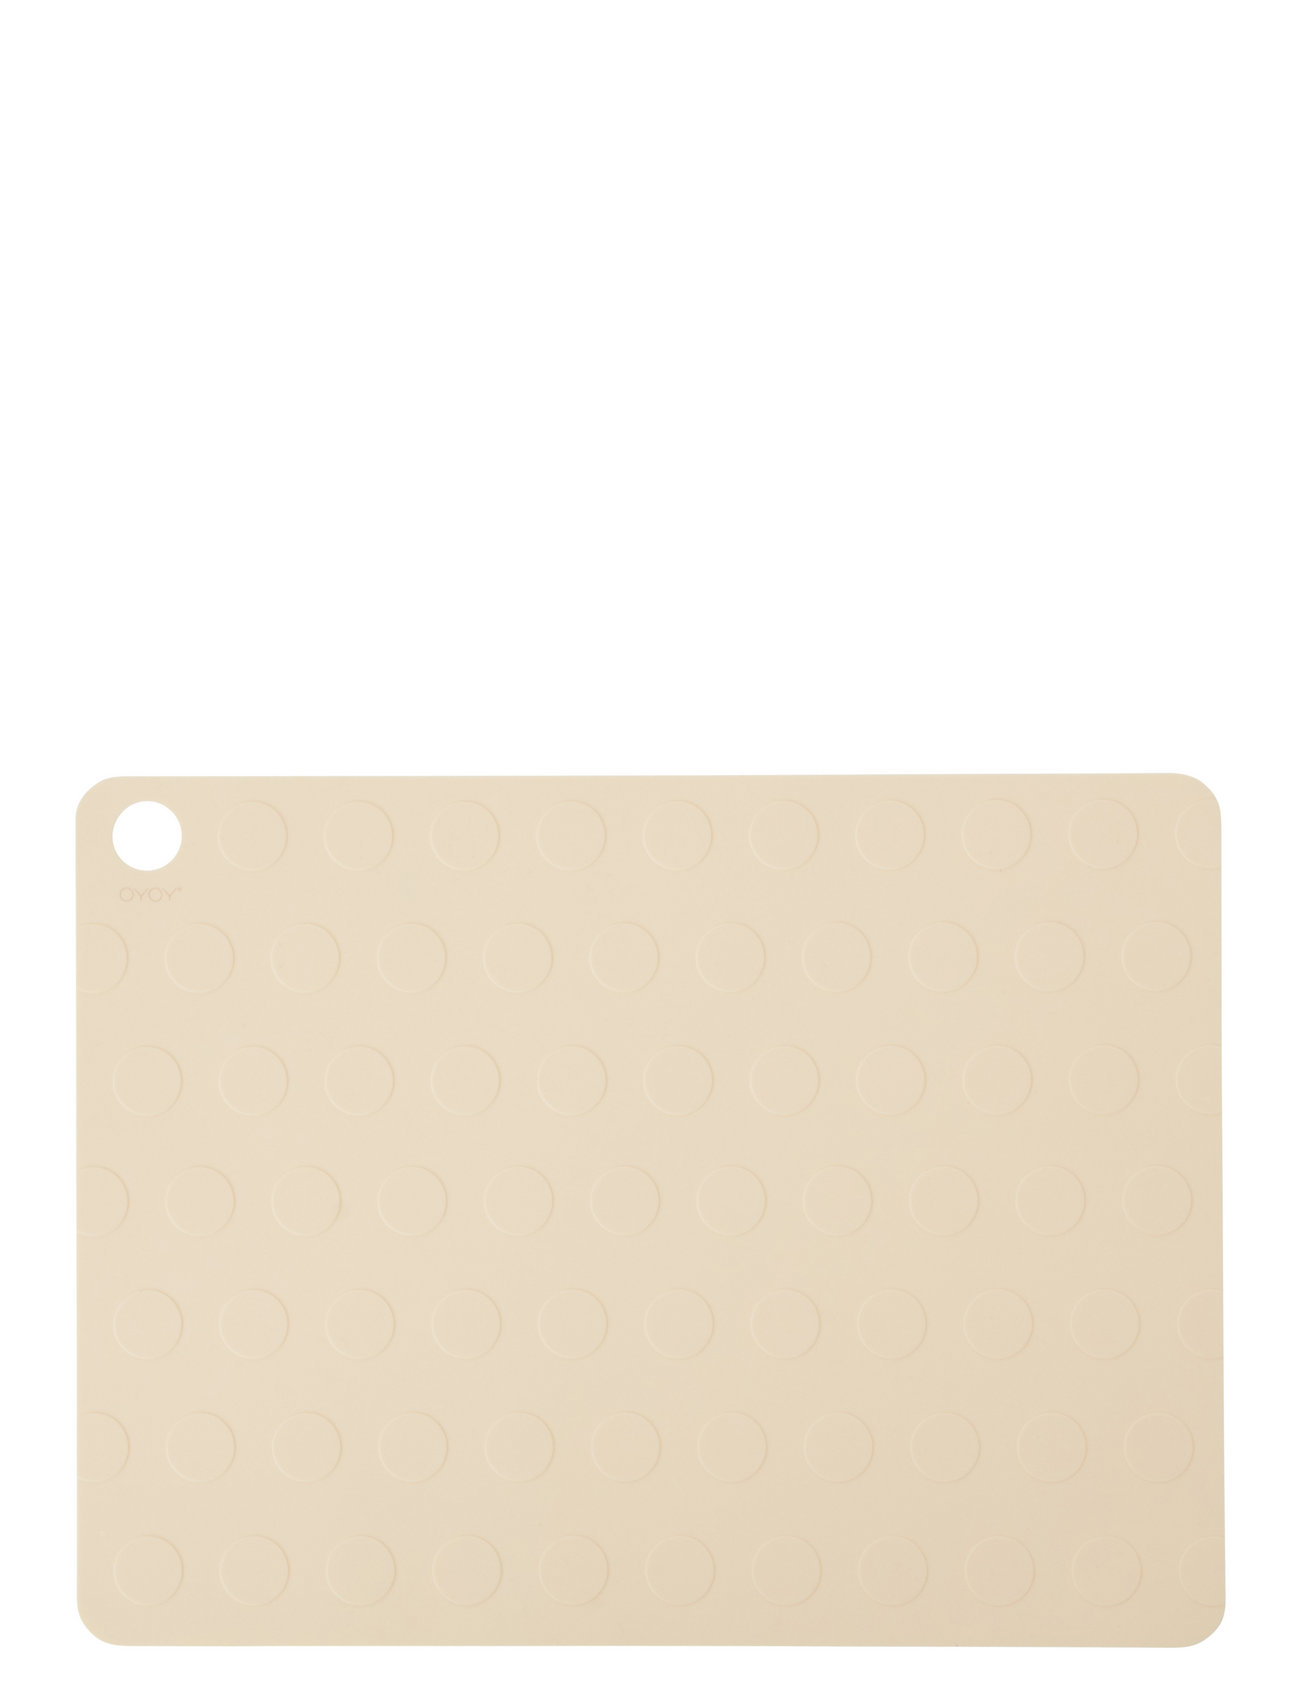 Dotto Placemat - Pack Of 2 Home Textiles Kitchen Textiles Placemats Cream OYOY Living Design